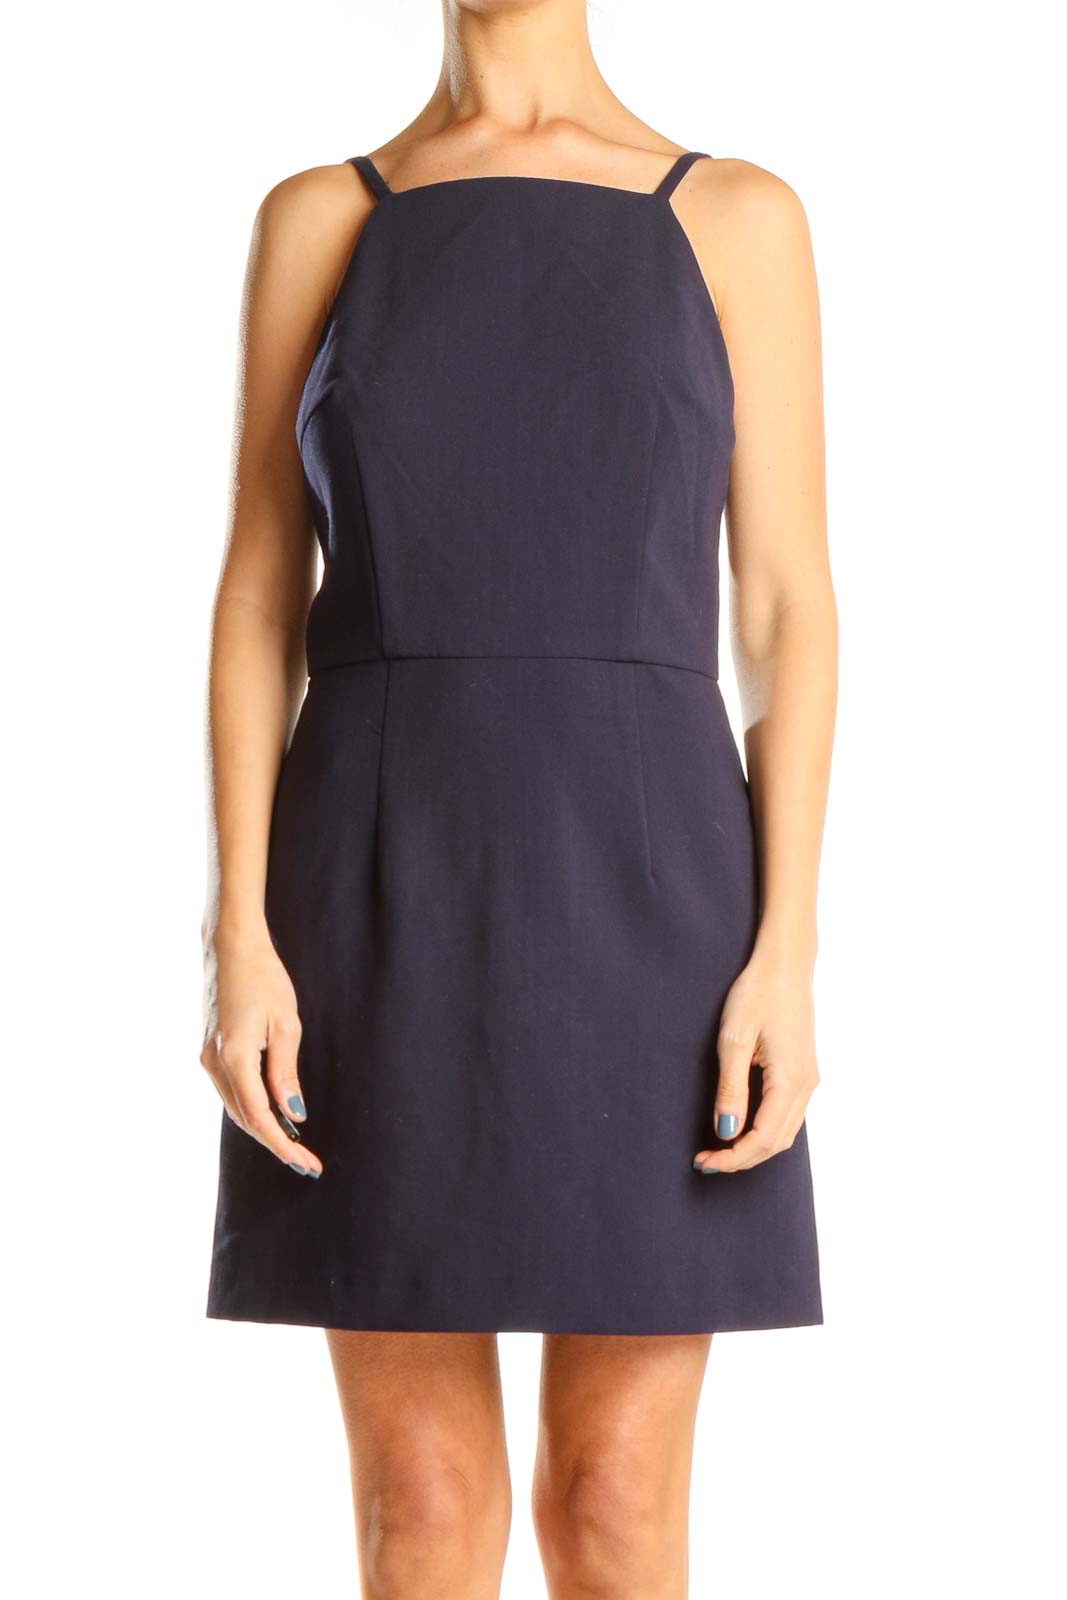 Blue High Neck Casual Dress Front